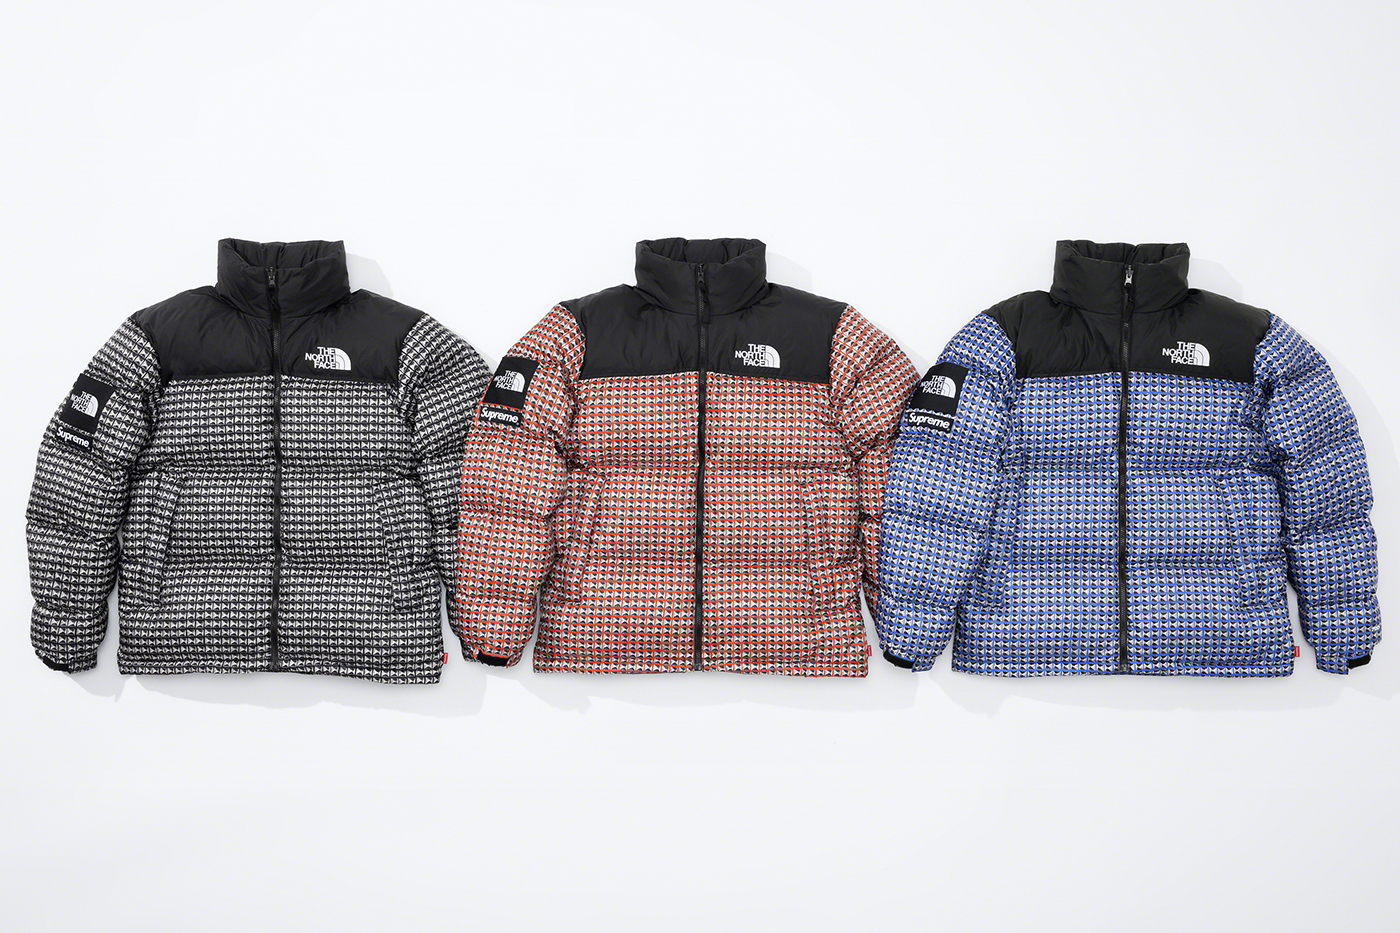 We'll Have One of Everything From The New Supreme x North Face Collab